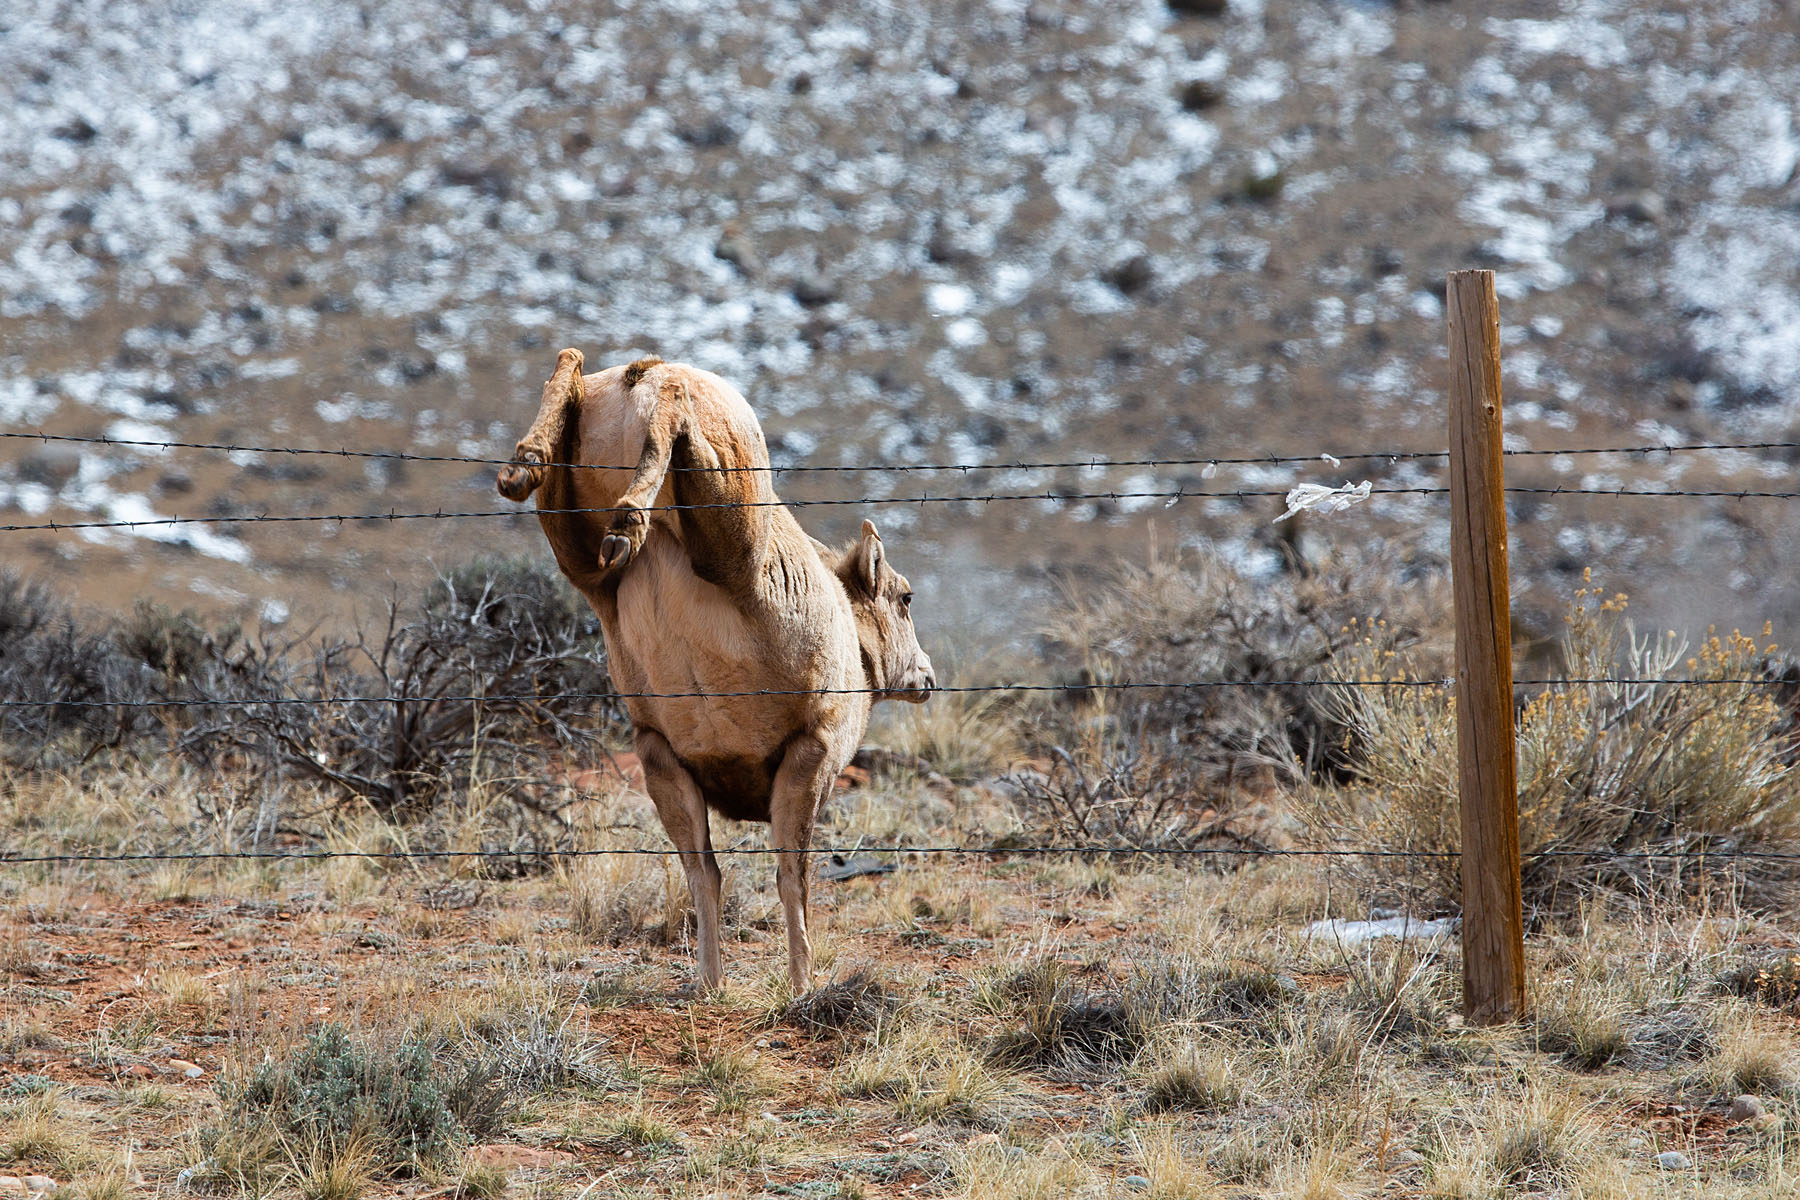 Bighorn ewe catches its heels on the fence but managed to land safely, near Dubois, Wyoming.  Click for next photo.